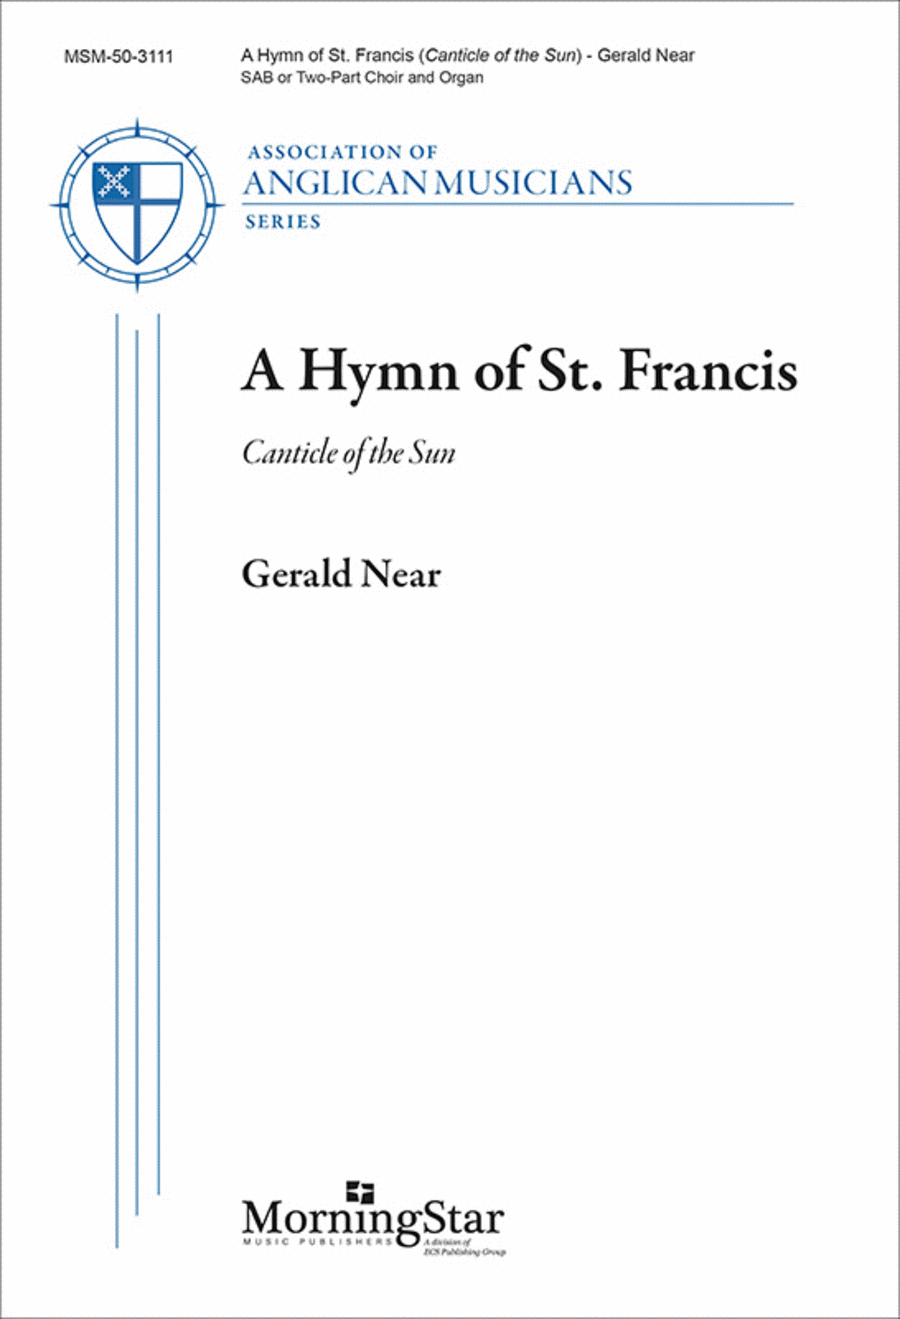 Hymn of St. Francis